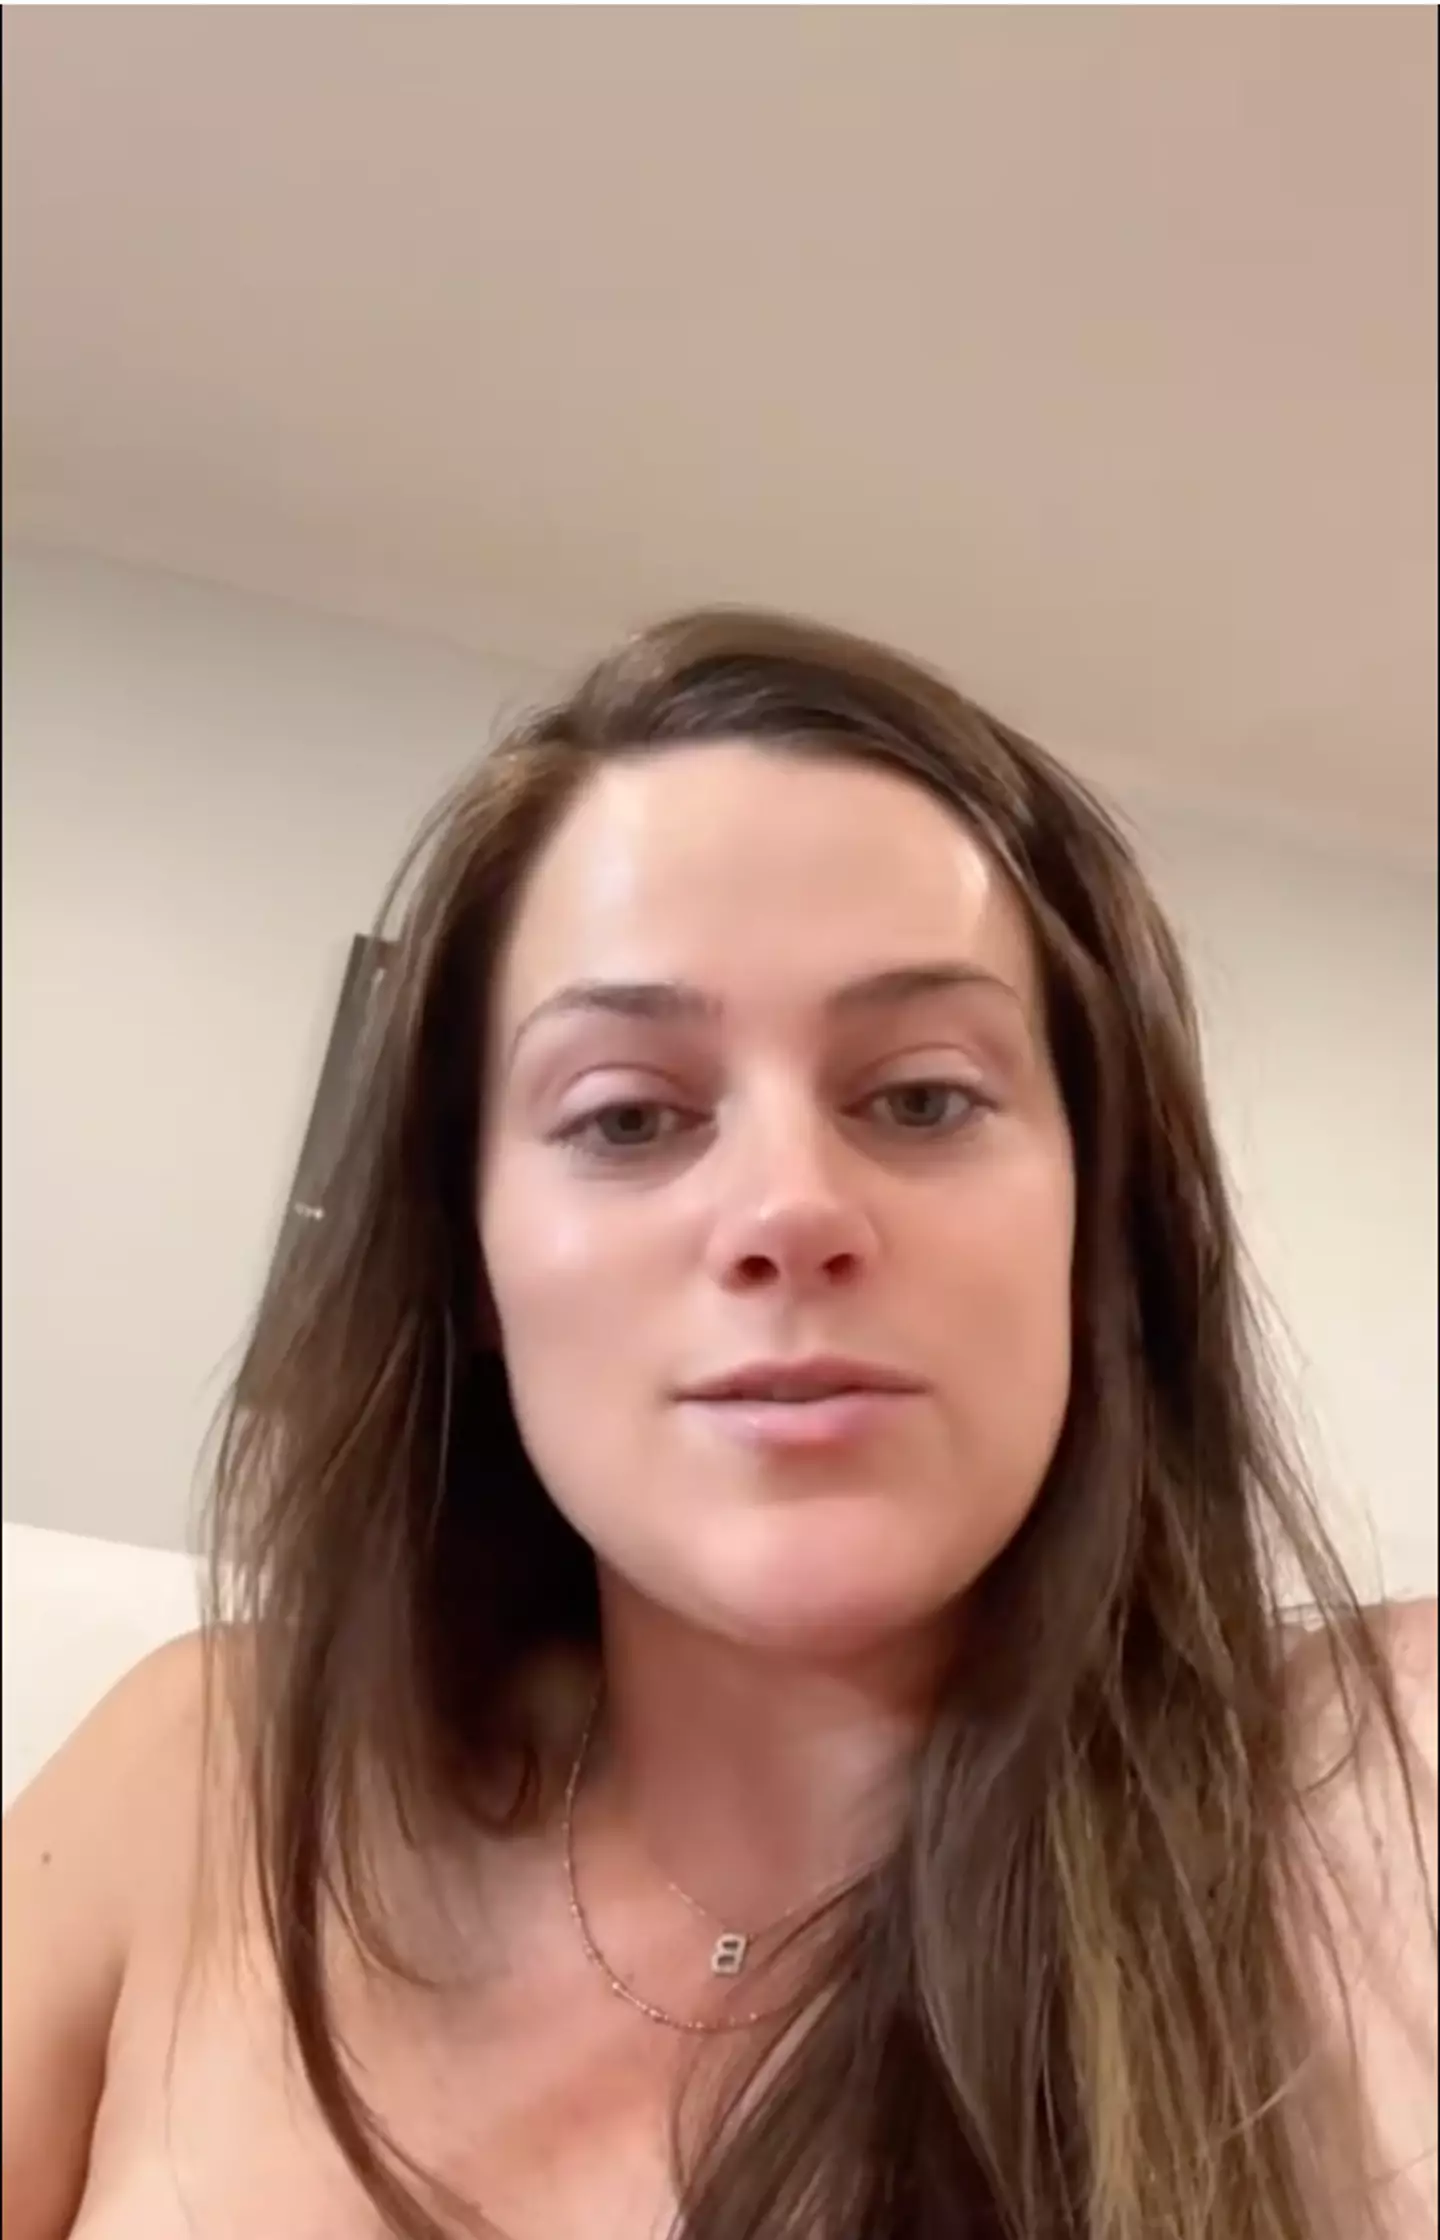 Lomax took to TikTok to talk about the situation.